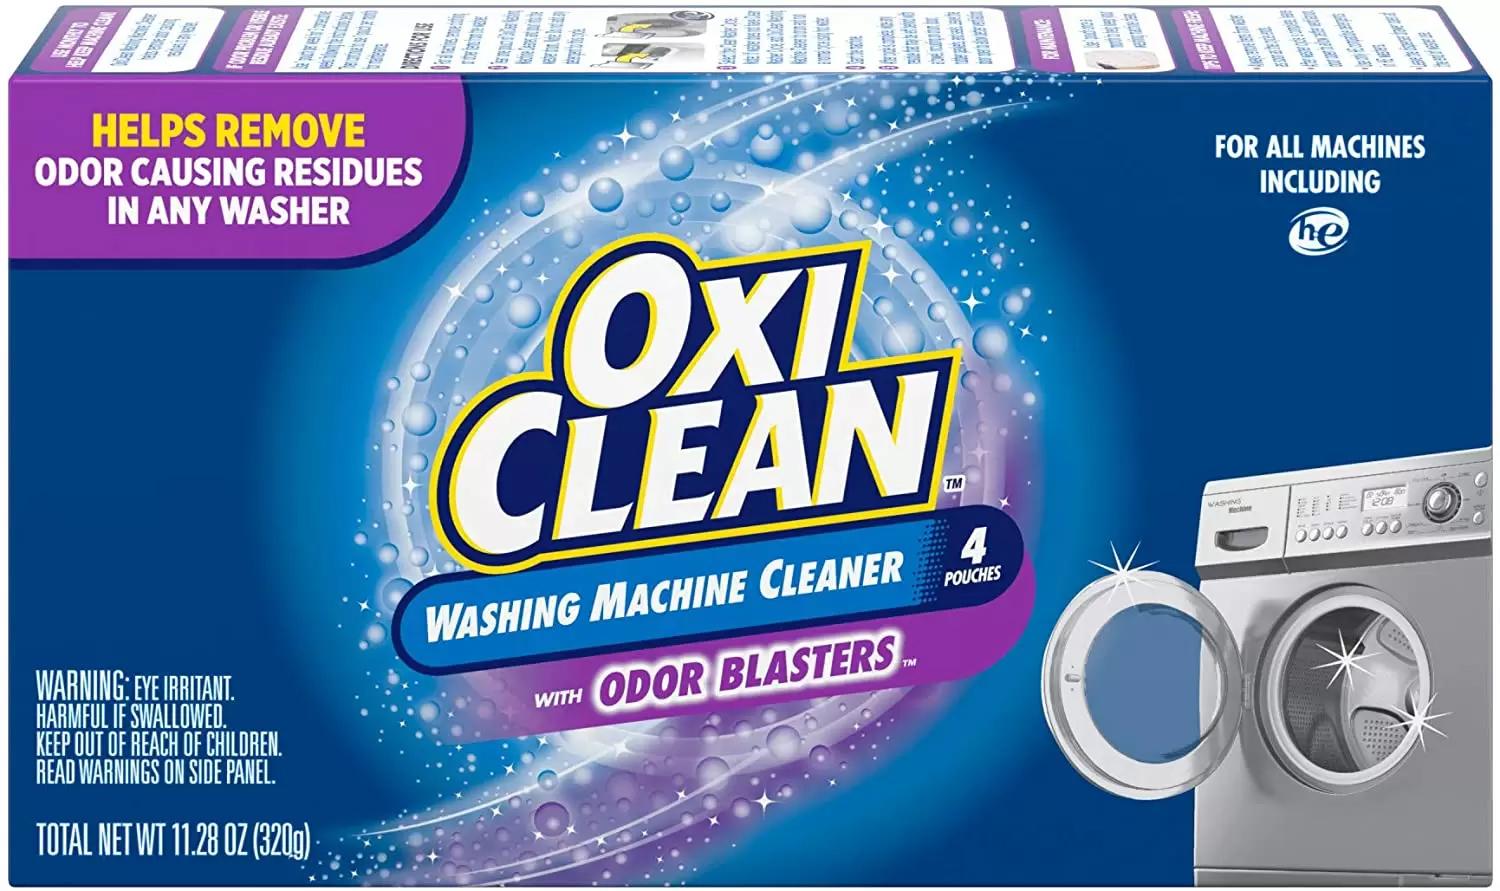 4 OxiClean Washing Machine Cleaner with Odor Blasters for $4.87 Shipped